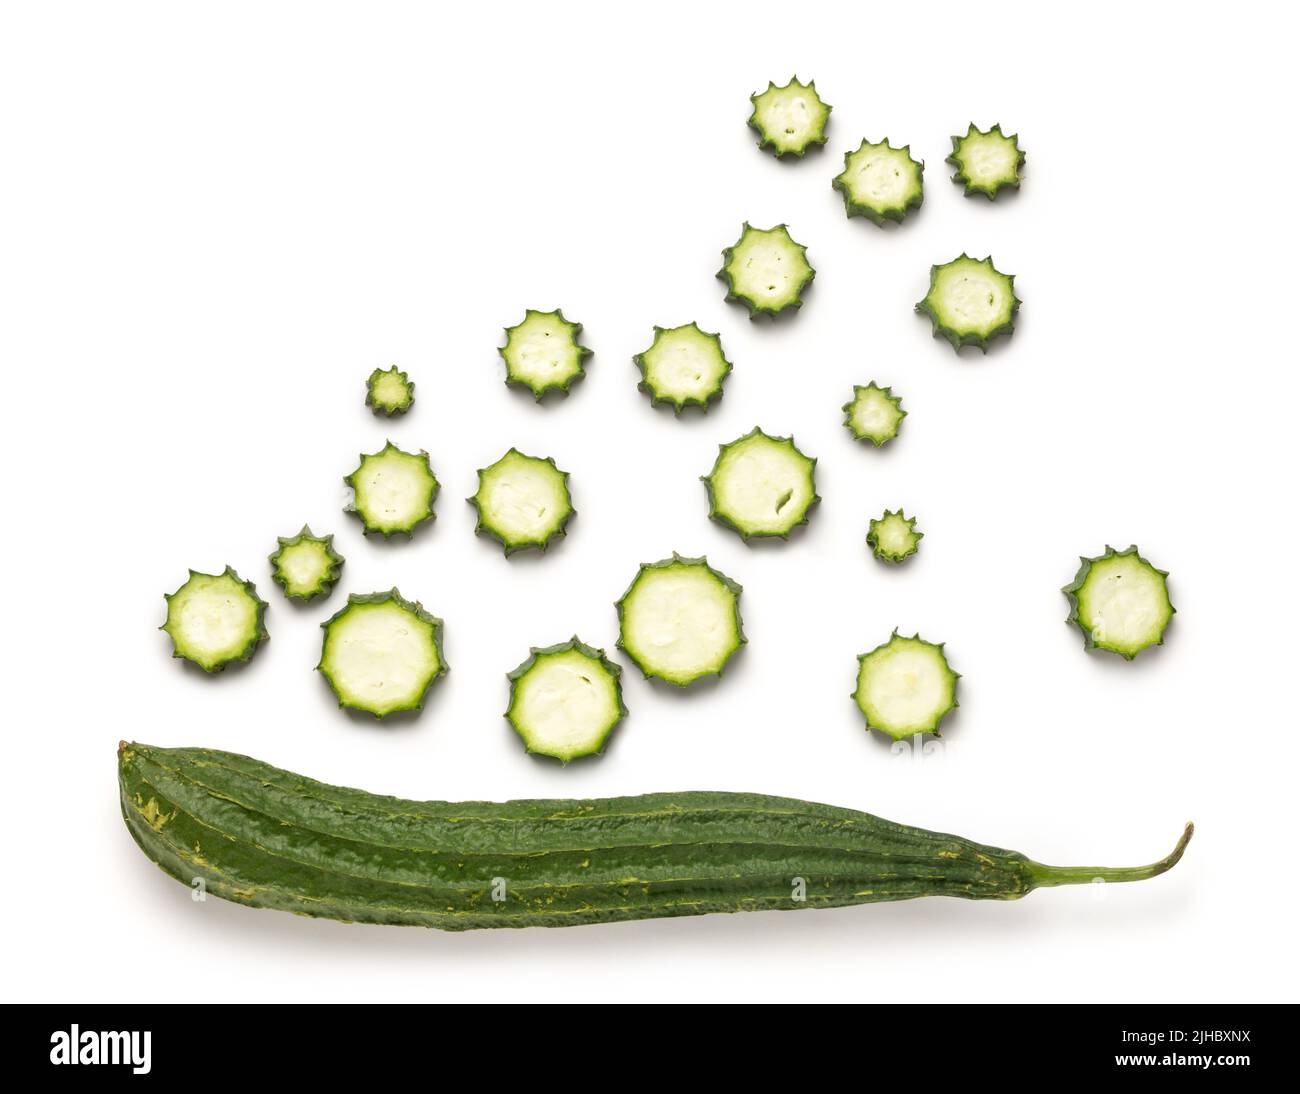 fresh angled luffa, whole fruit with slices on white background, also known as ridged gourd or chinese okra, healthy vegetable taken from above Stock Photo